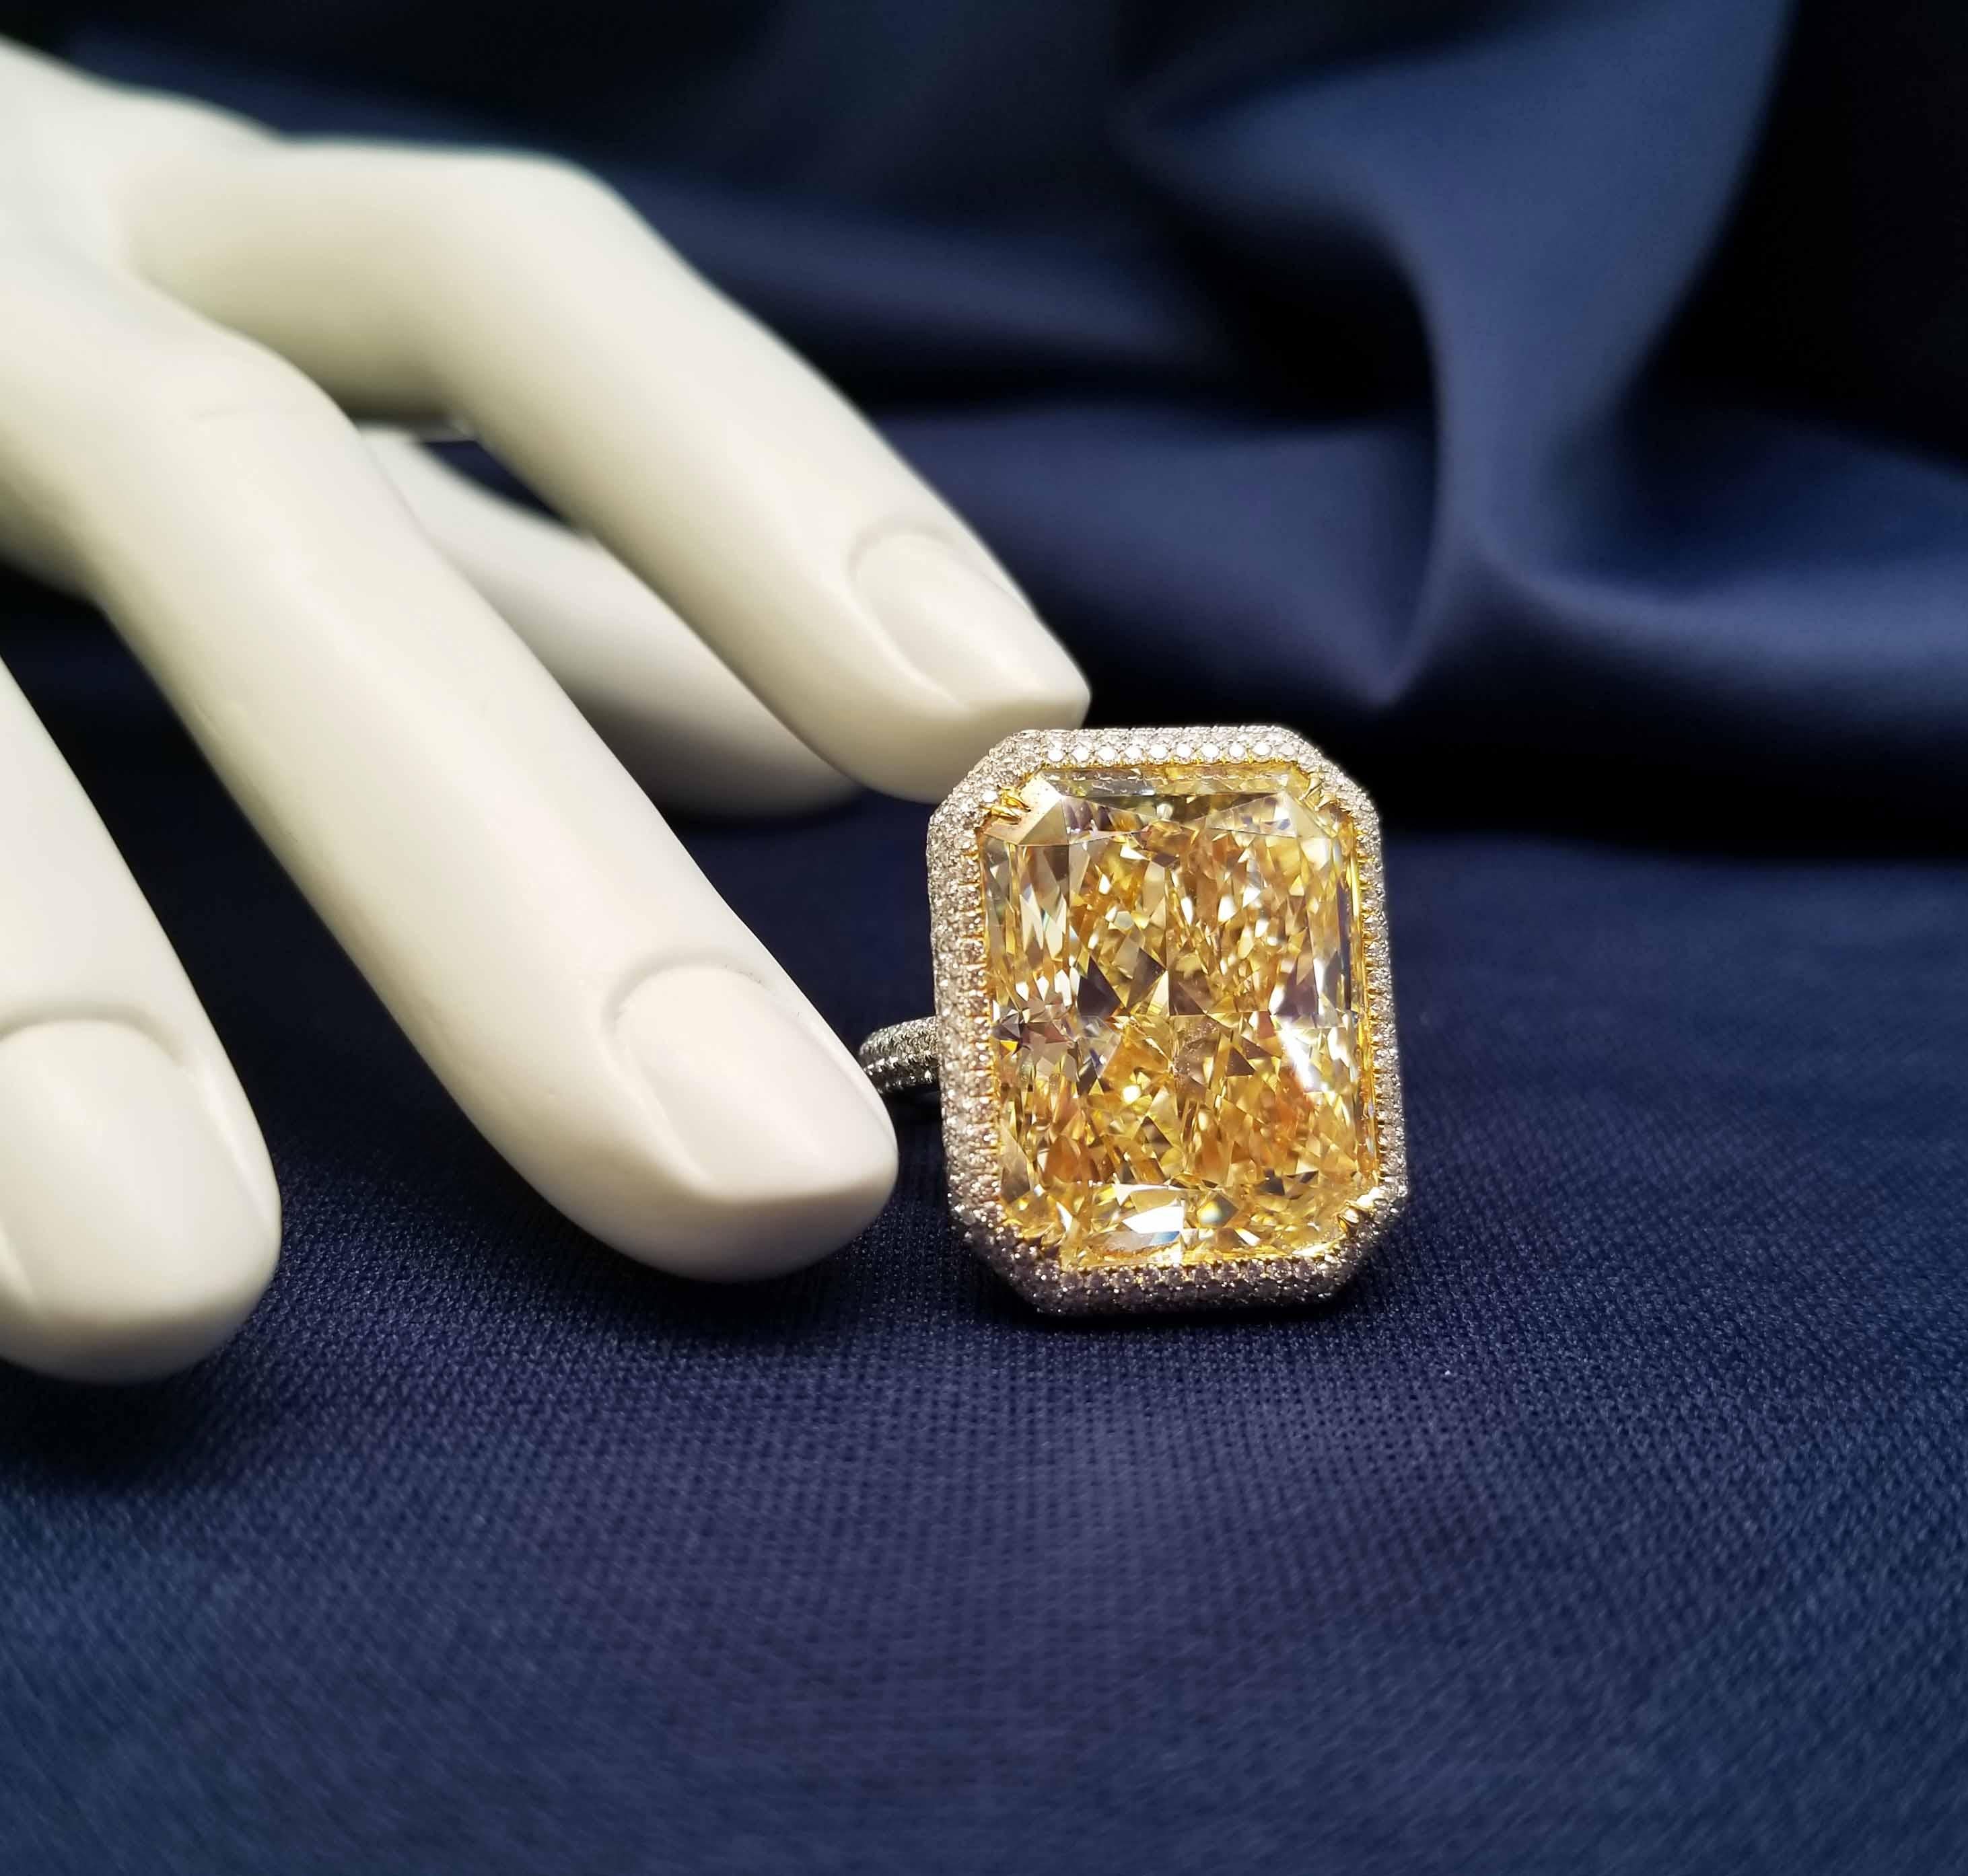 From SCARSELLI, a spectacular 31+ carat VS1 clarity Fancy Yellow Diamond Ring and other SCARSELLI private collection diamonds are available through 1st Dibs Upon Request.  This 31+ carat Fancy Yellow VS1 Clarity Diamond is perfectly finished